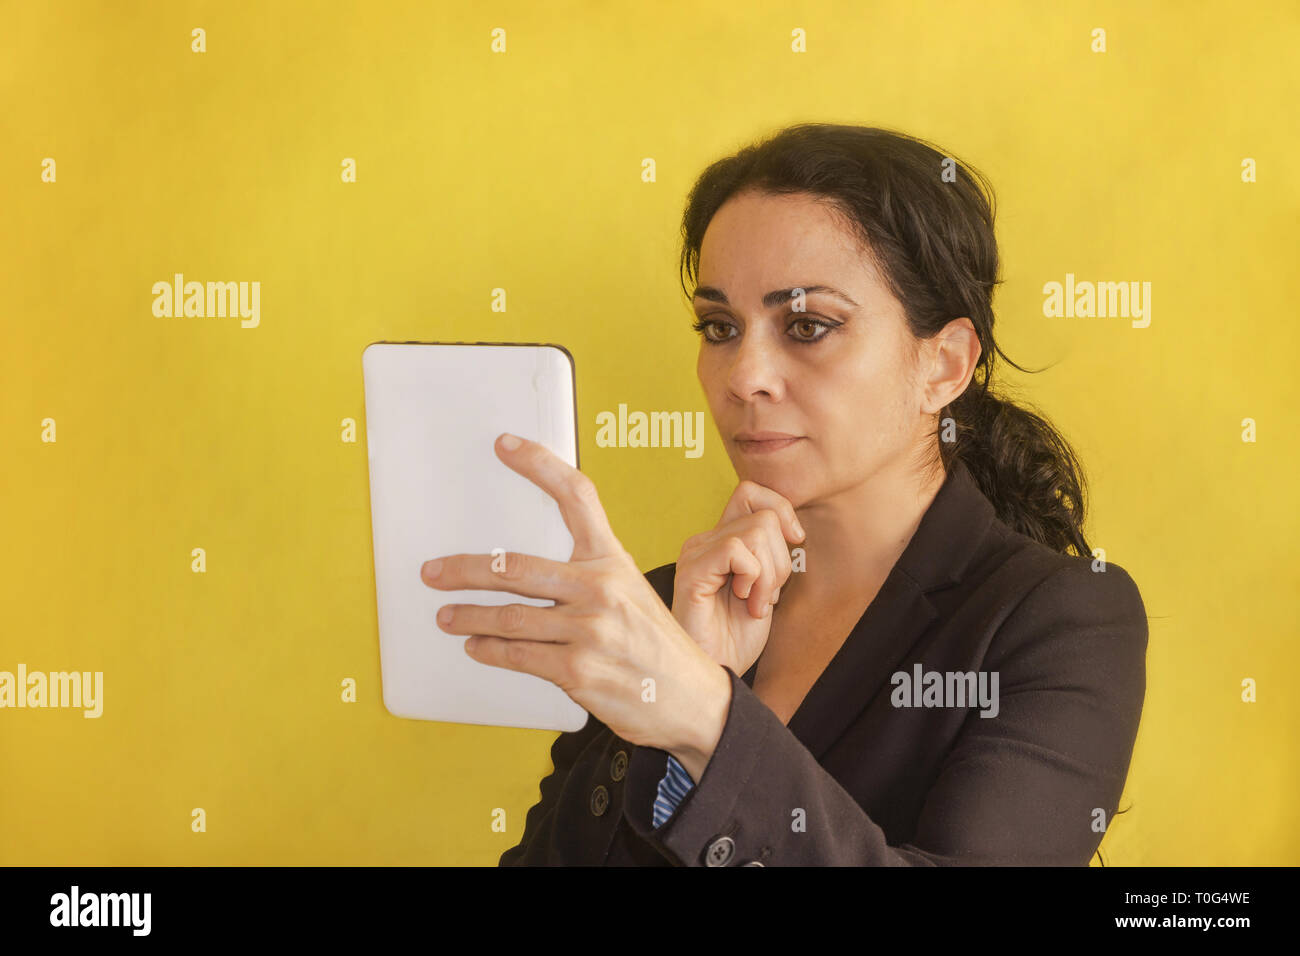 Beautiful young business woman, with pigtail, black jacket, isolated on a background, looking at her tablet. Woman analyzing data Stock Photo